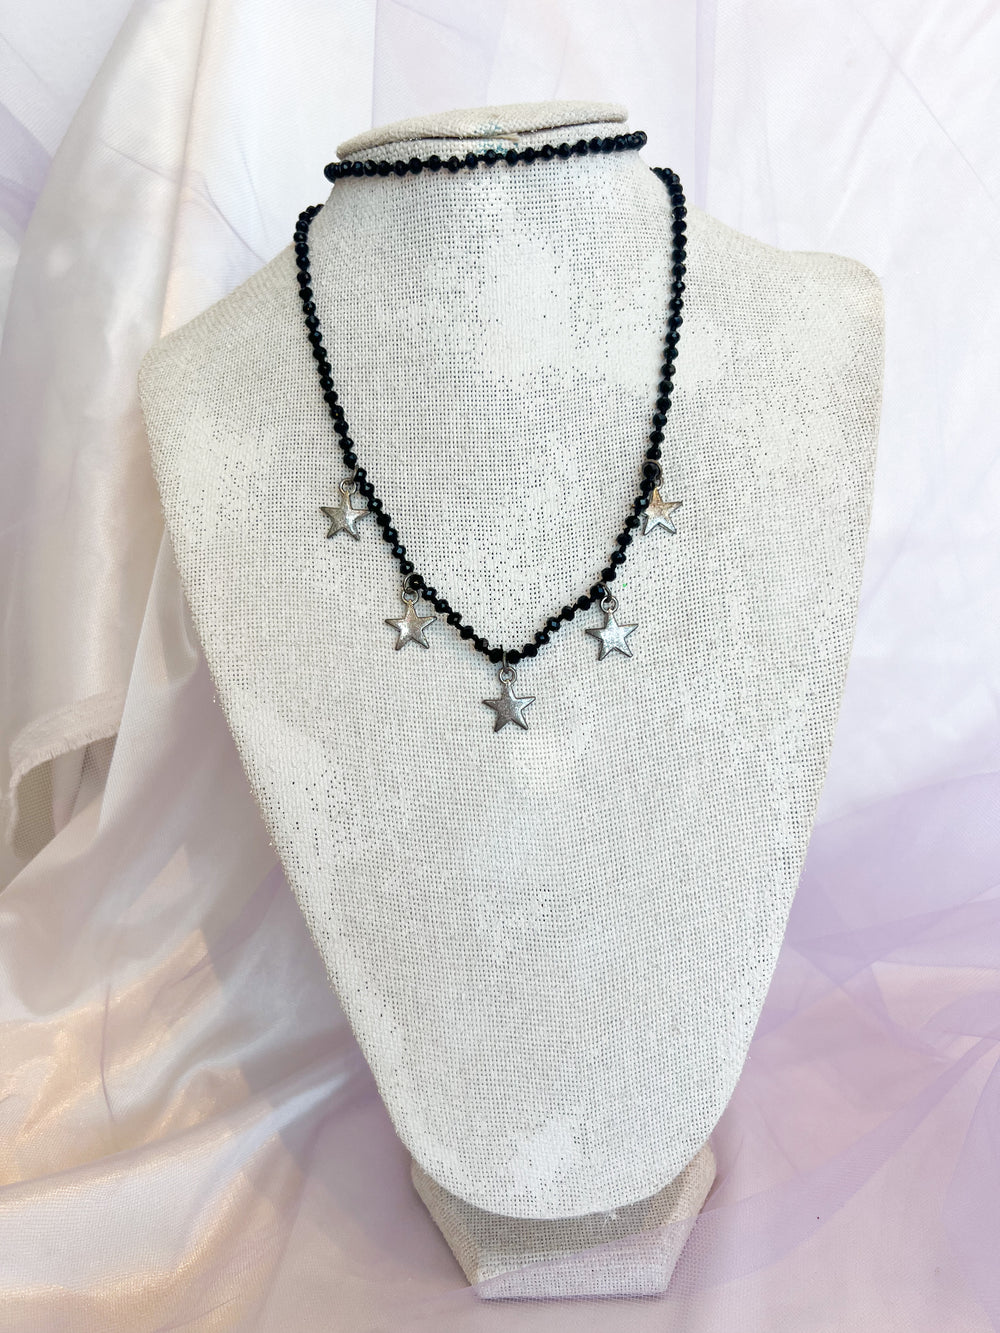 Star Beaded Long Necklace